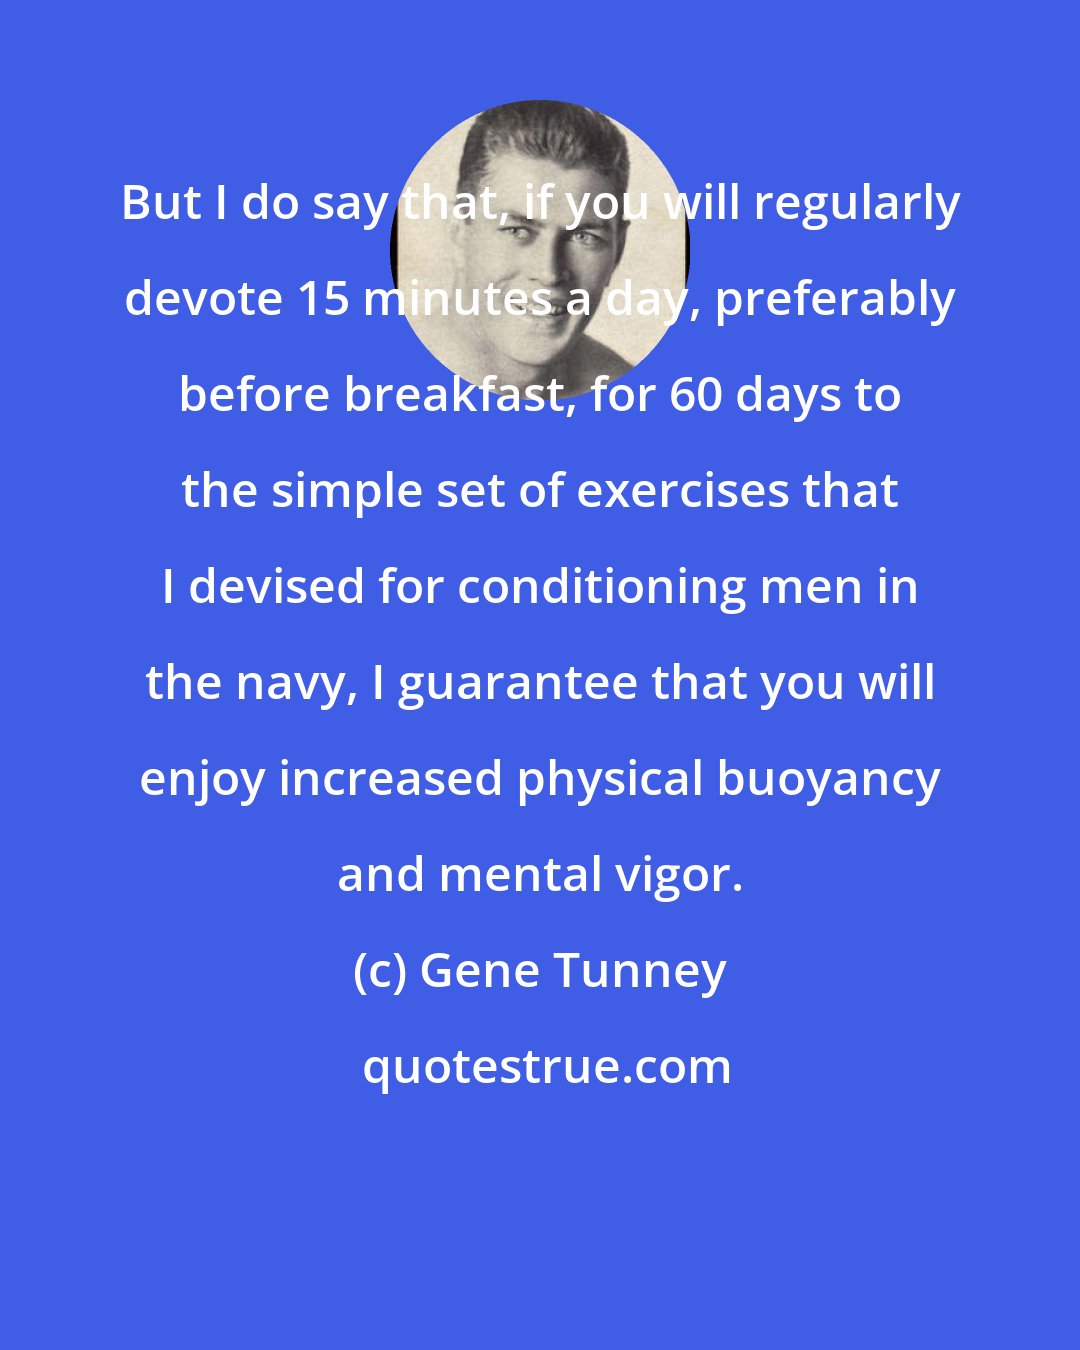 Gene Tunney: But I do say that, if you will regularly devote 15 minutes a day, preferably before breakfast, for 60 days to the simple set of exercises that I devised for conditioning men in the navy, I guarantee that you will enjoy increased physical buoyancy and mental vigor.